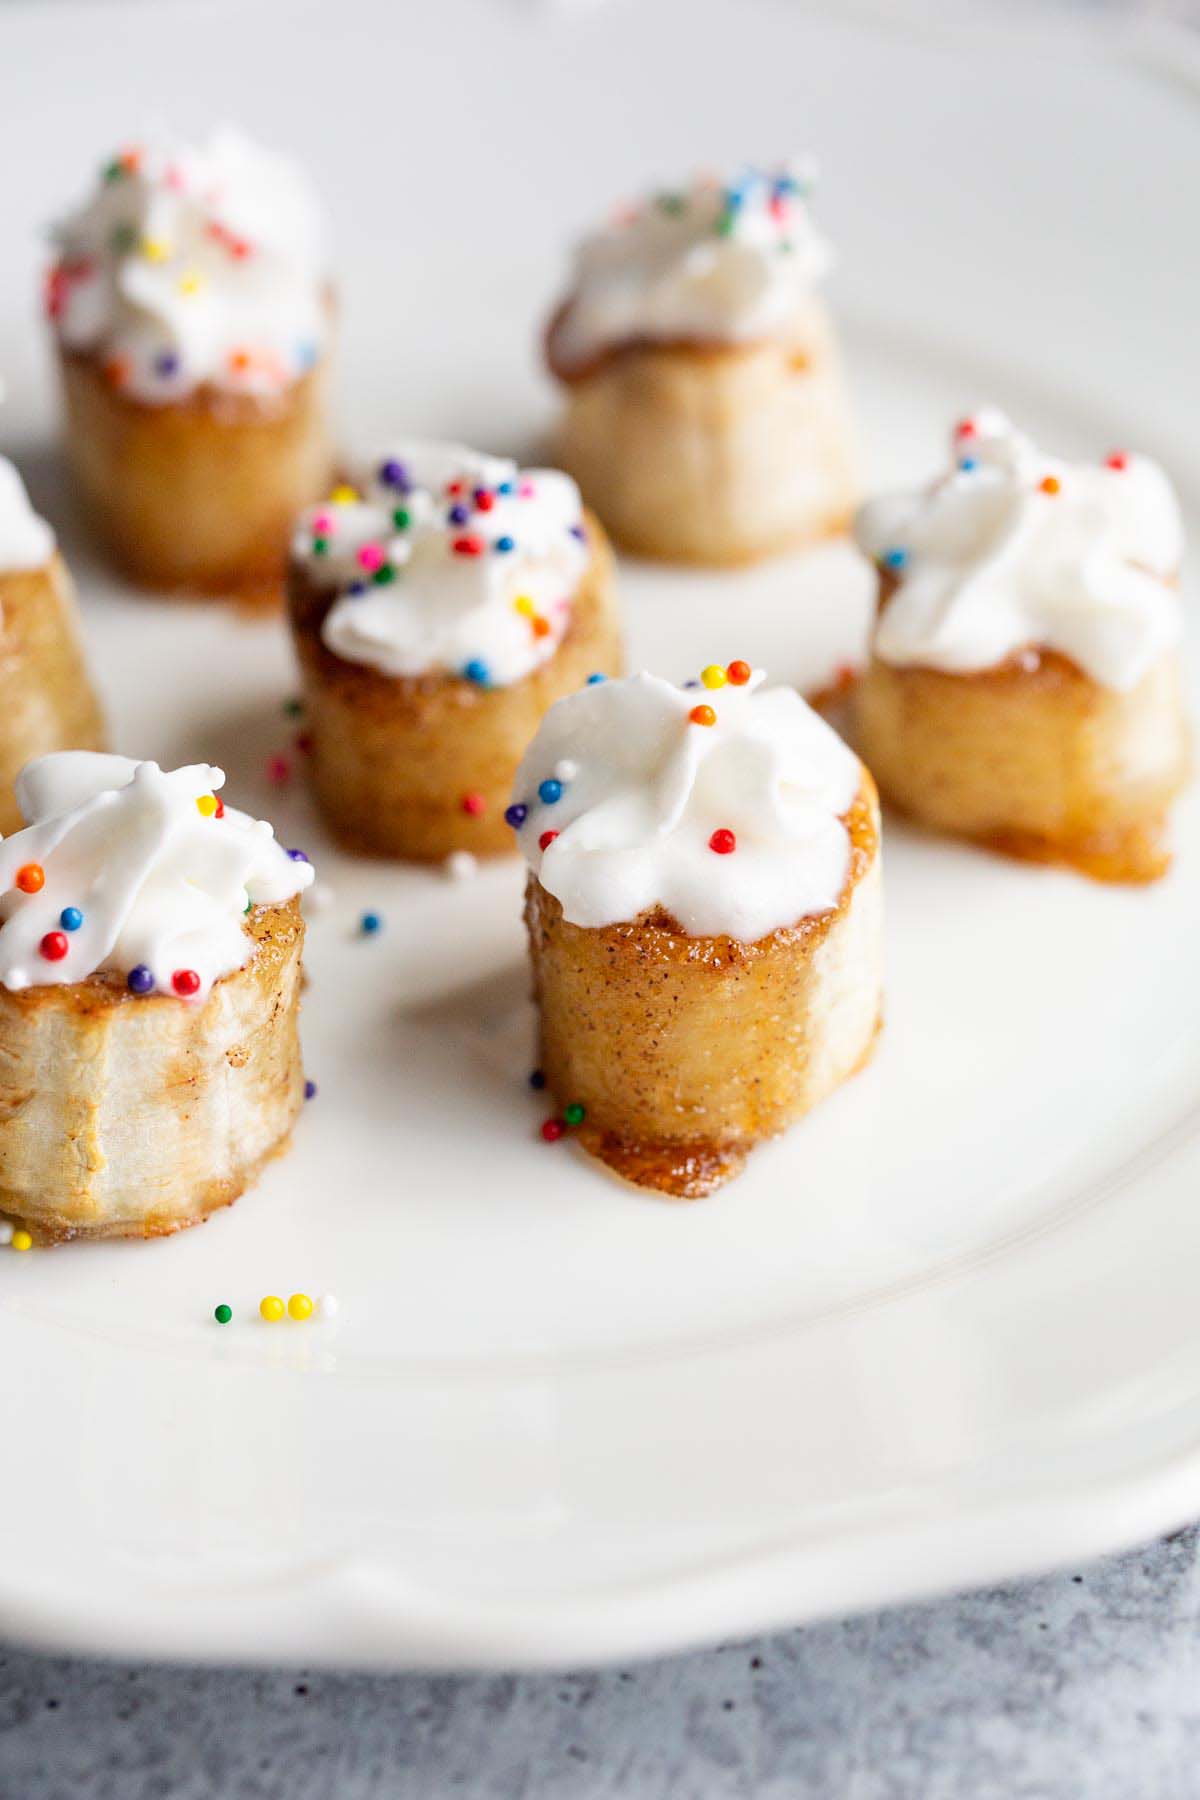 Banana bites with whipped cream and sprinkles